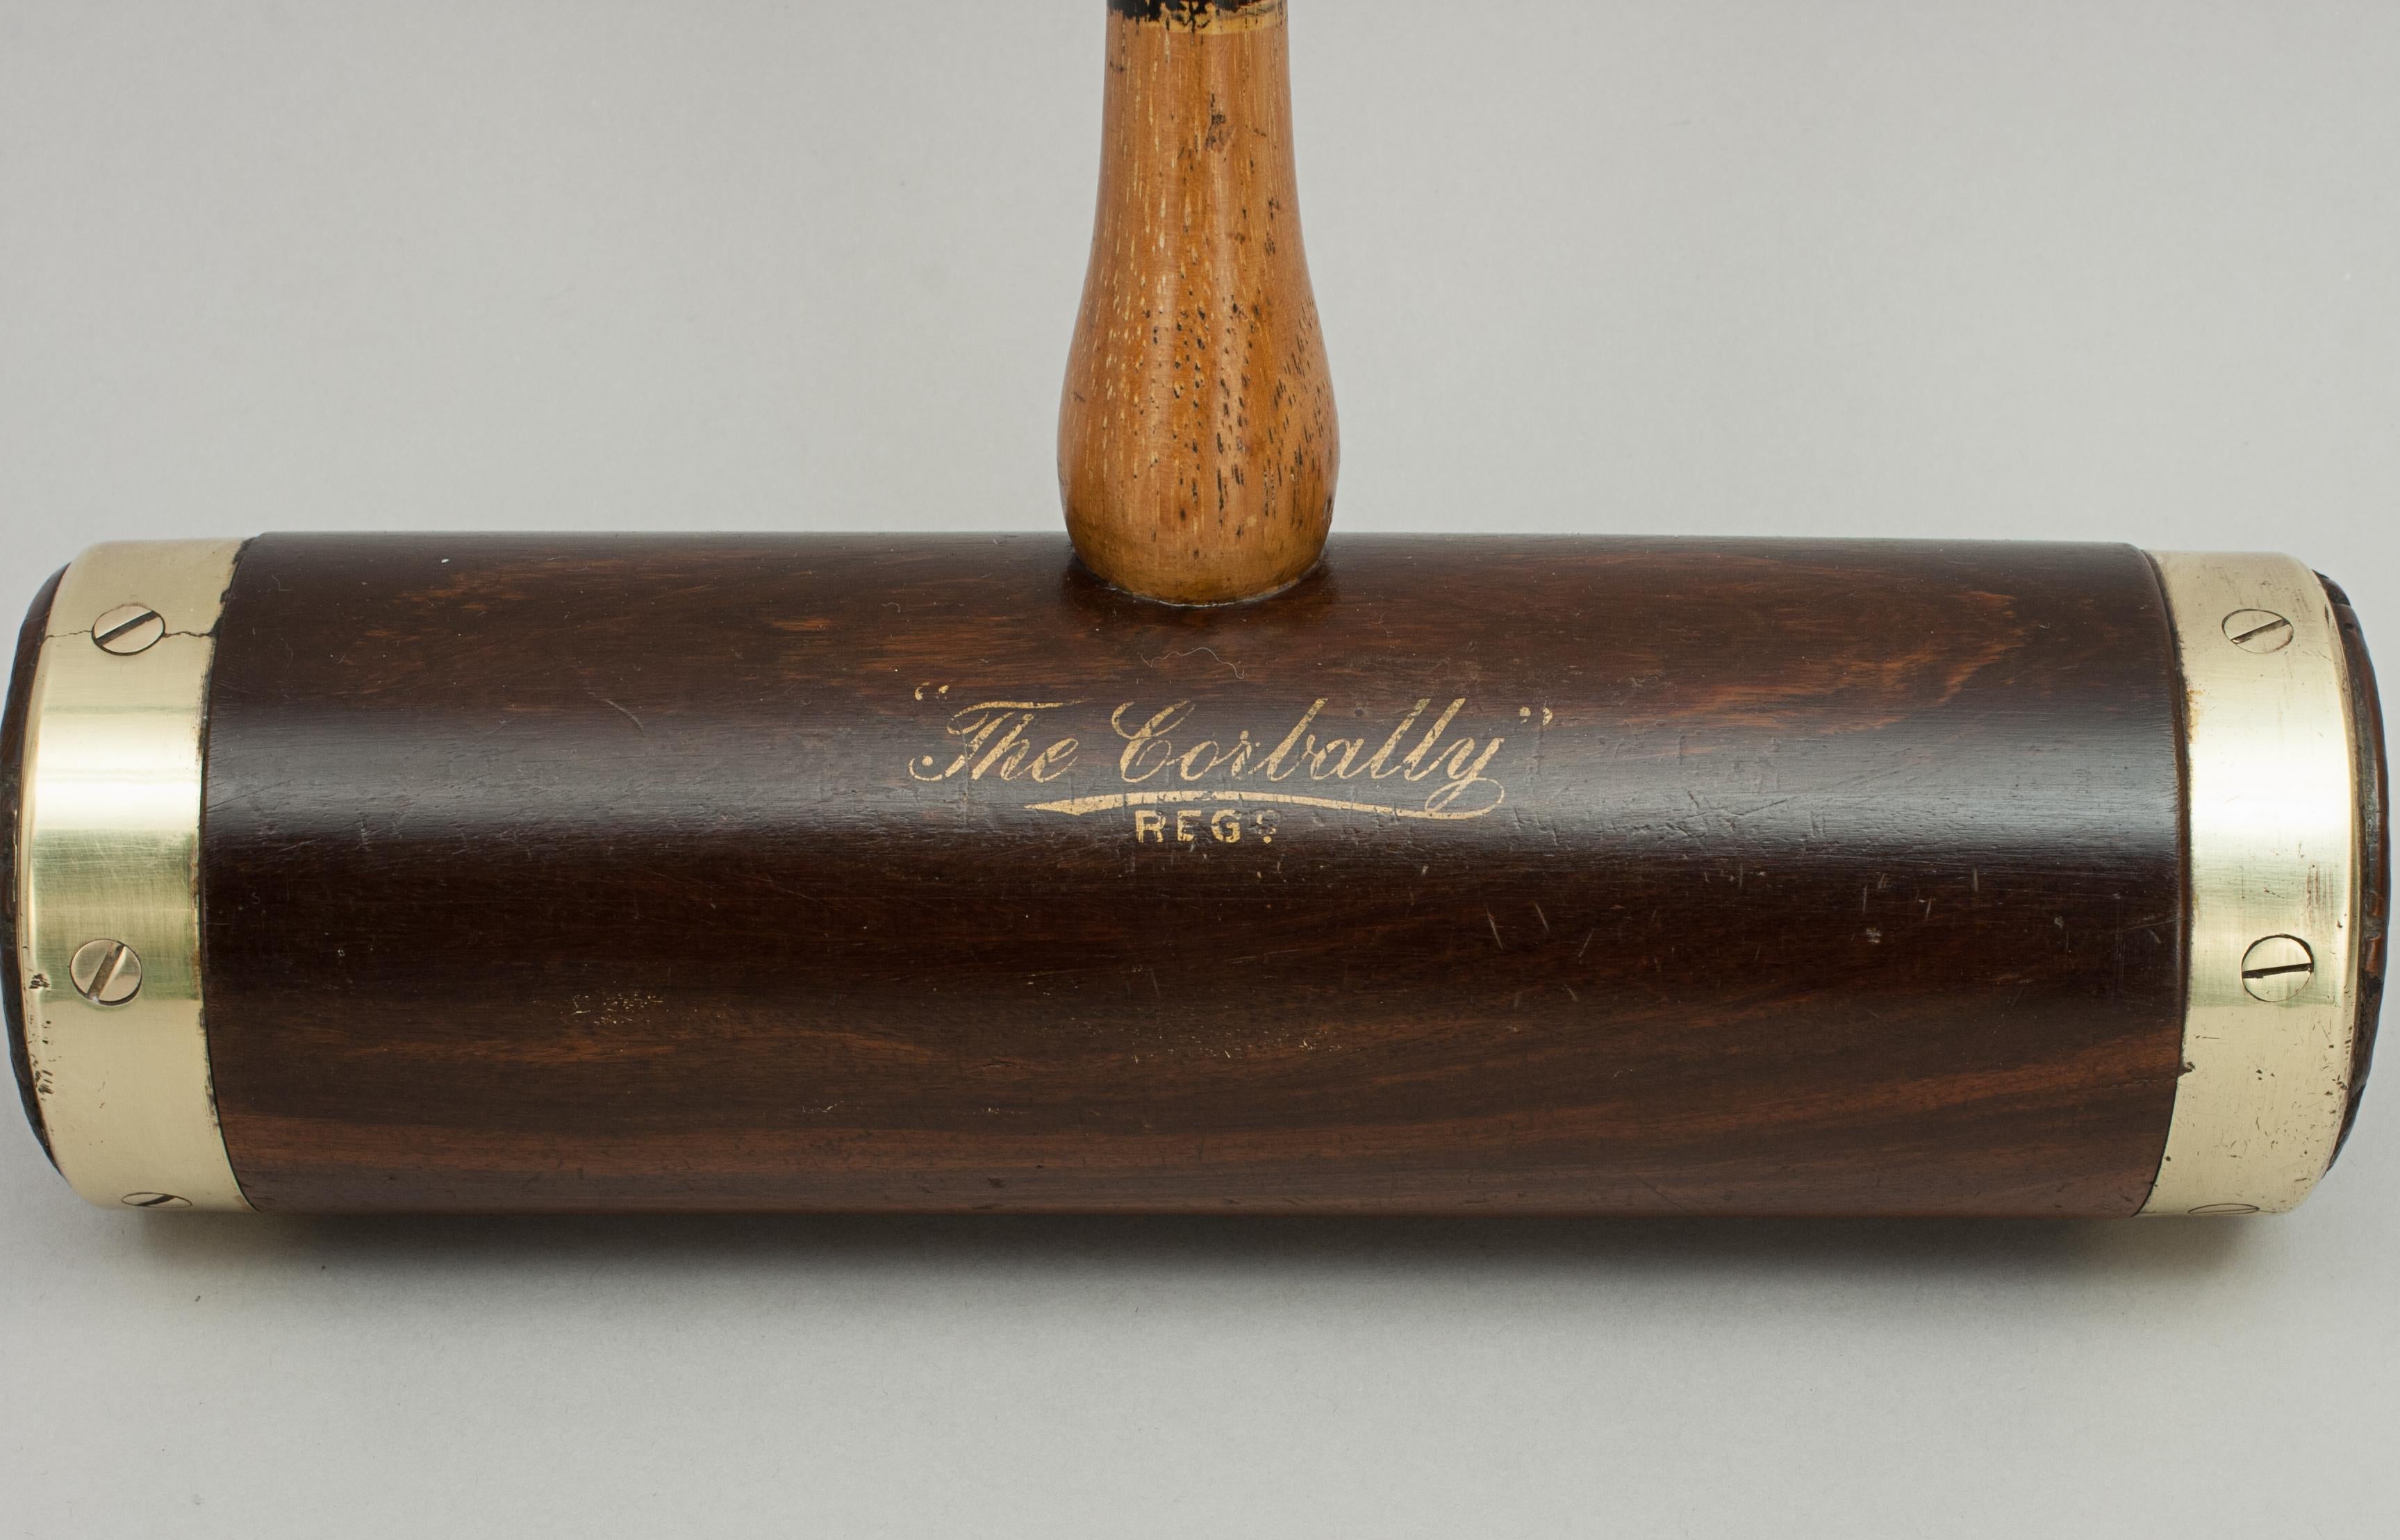 trade me croquet mallet for sale